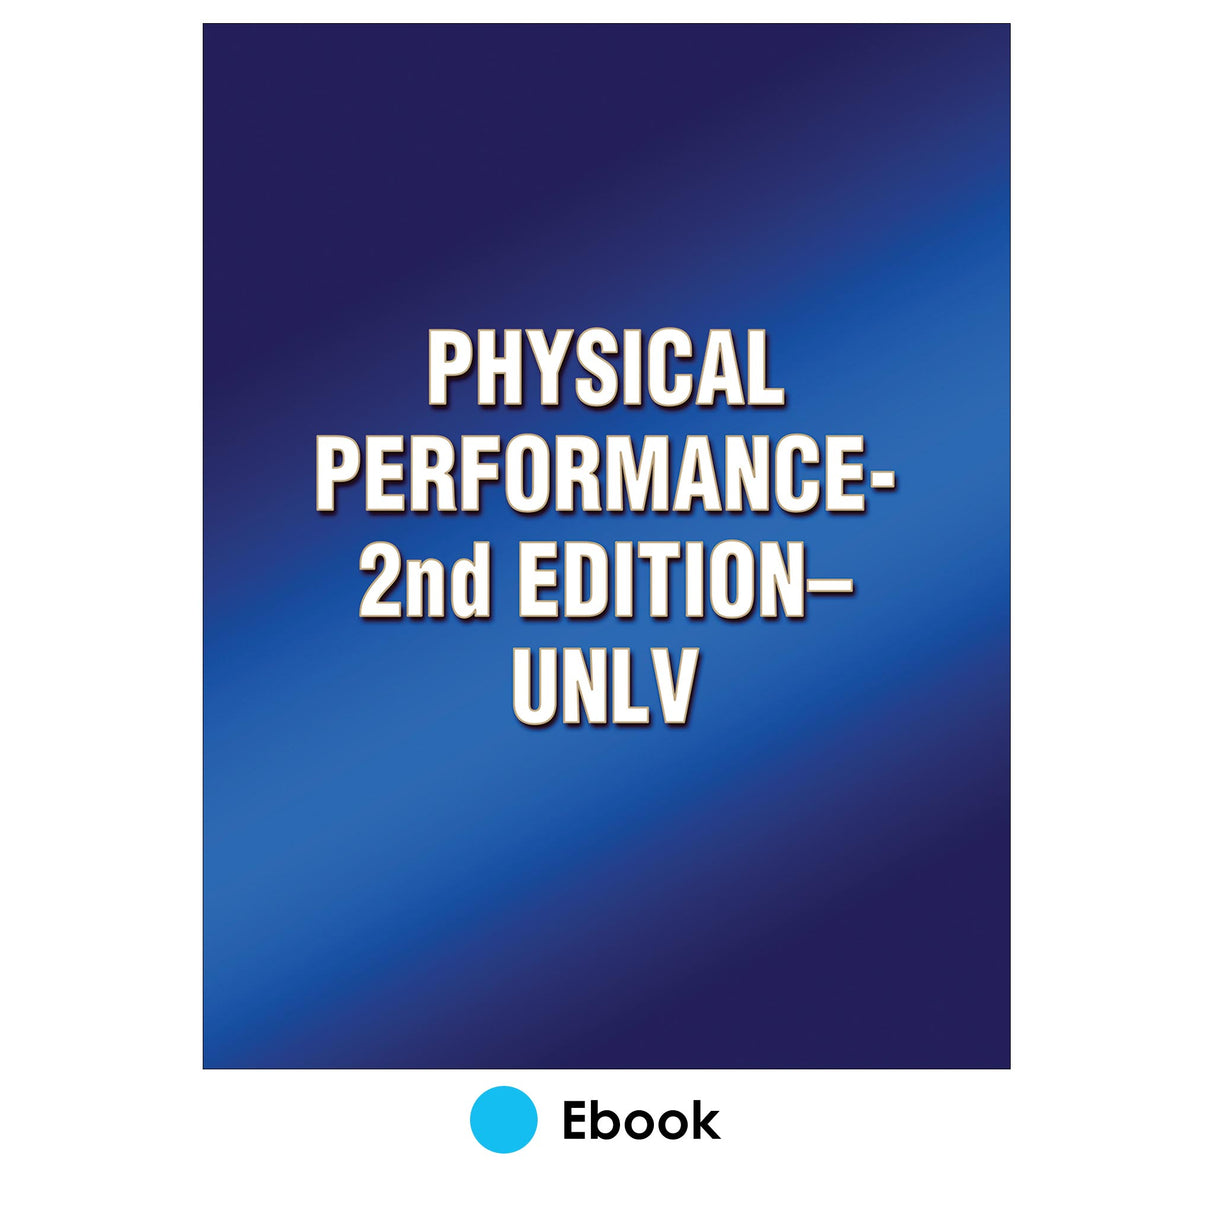 Physical Performance-2nd Edition-UNLV